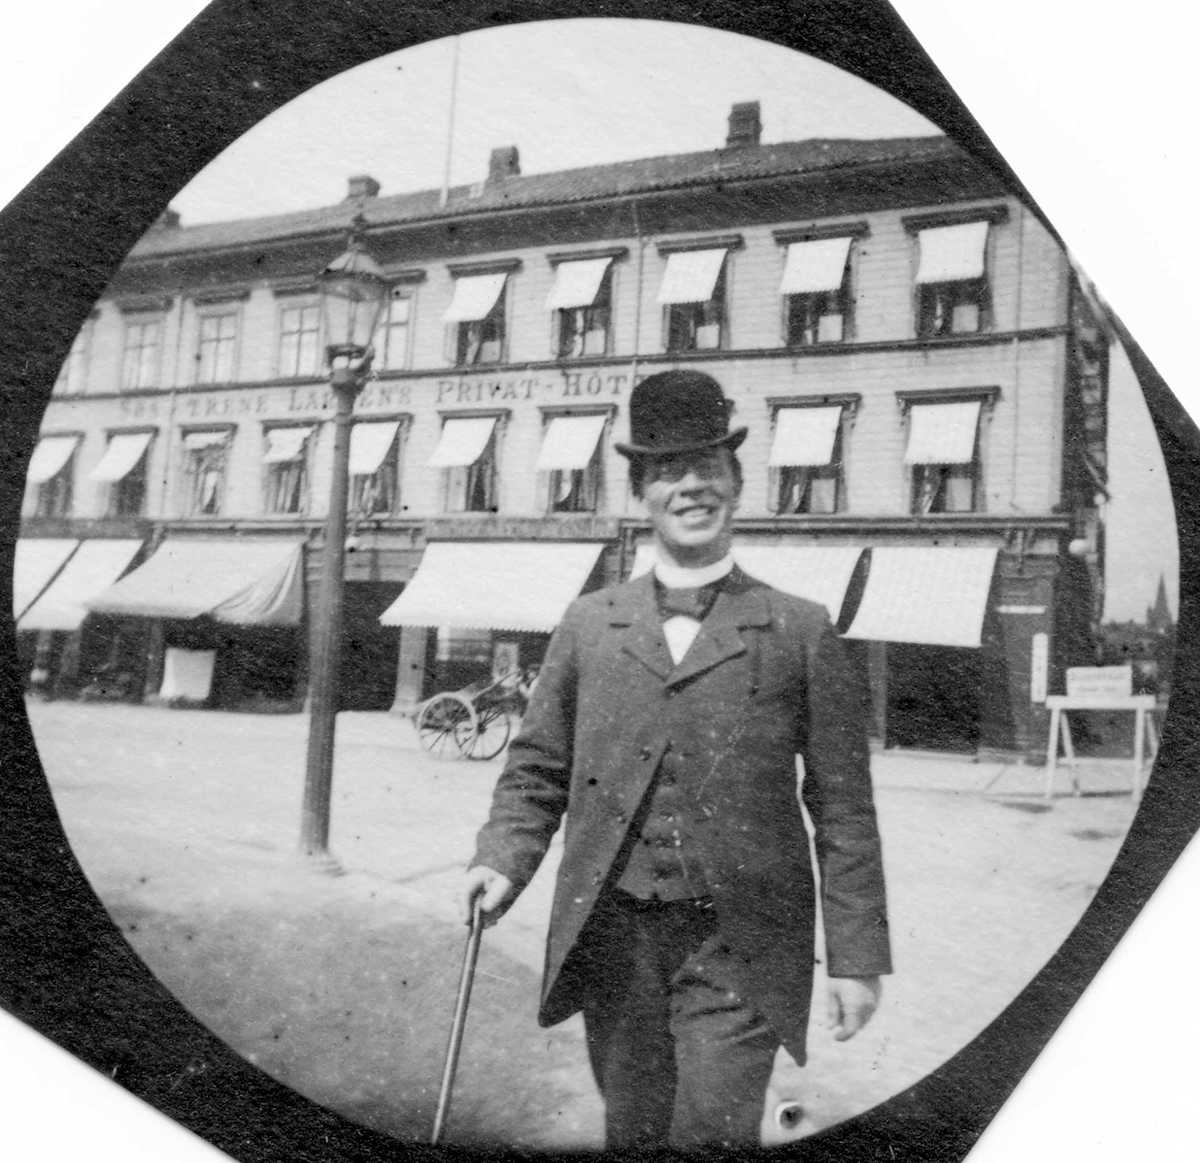 Being a Norwegian student at the start of his stealth pastime, Størmer left us with a wealth of casual Norwegian street life photography in the 1890s. All taken with a concealed Vest Camera of Gray and Stirn from 1886. Sourced through Jessica Stewart | My Modern Met.